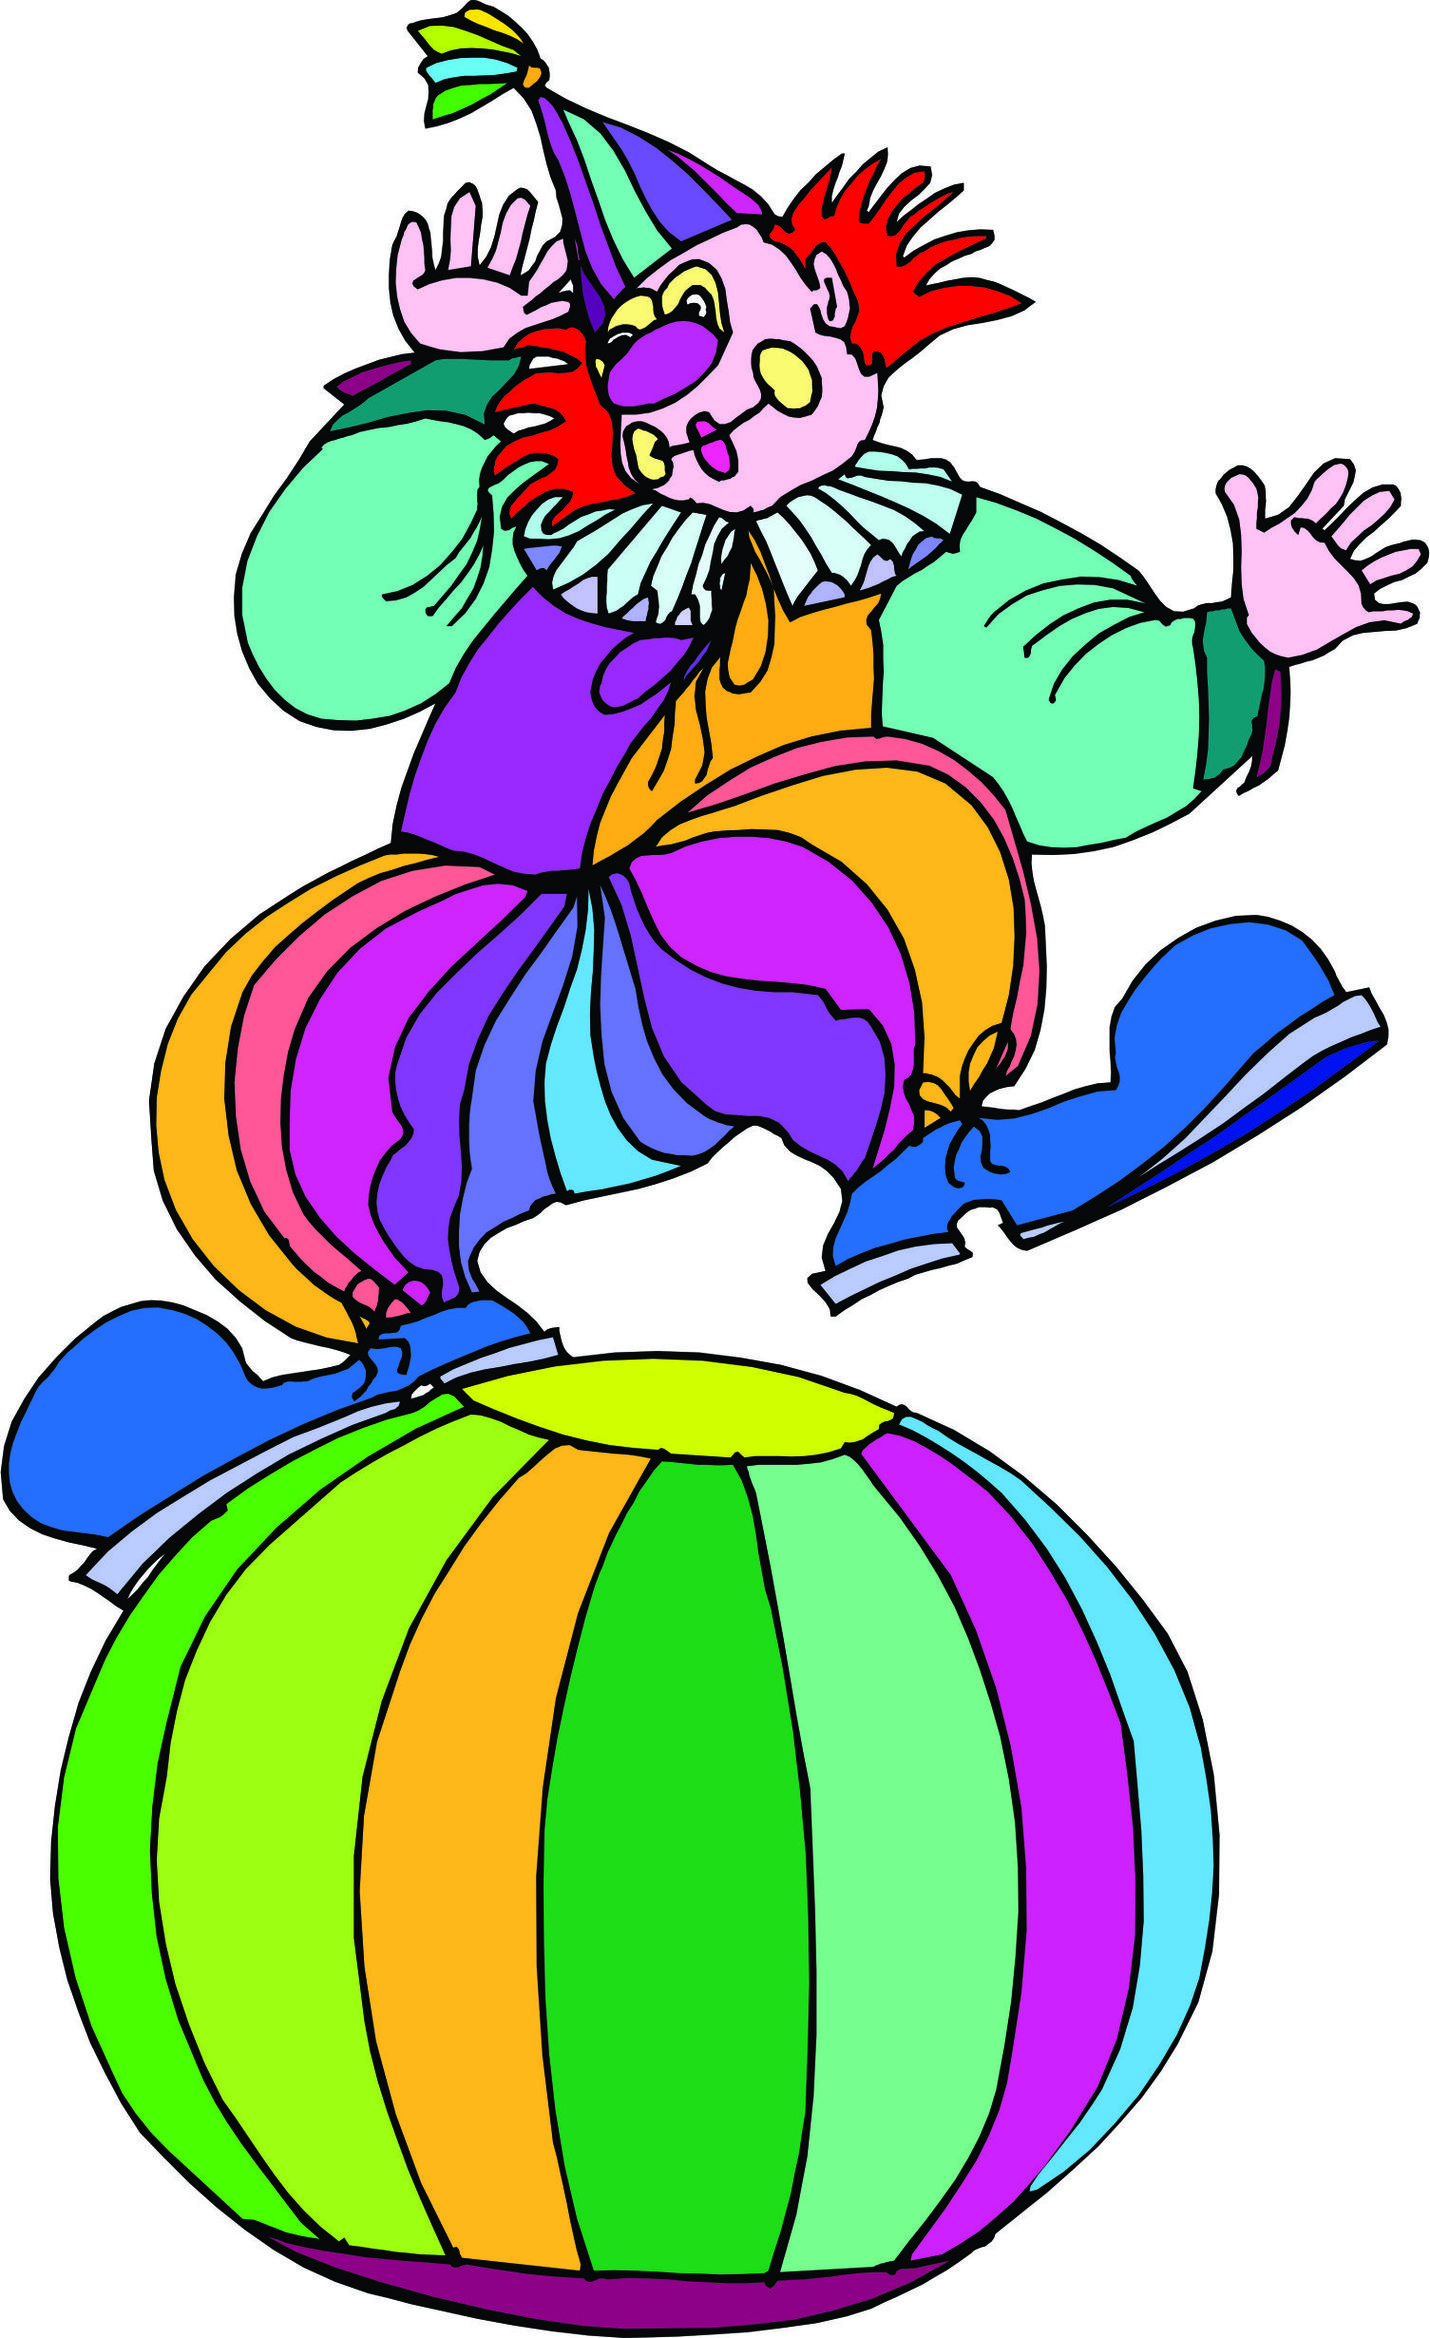 Cartoon Clown Images Clipart - Free to use Clip Art Resource